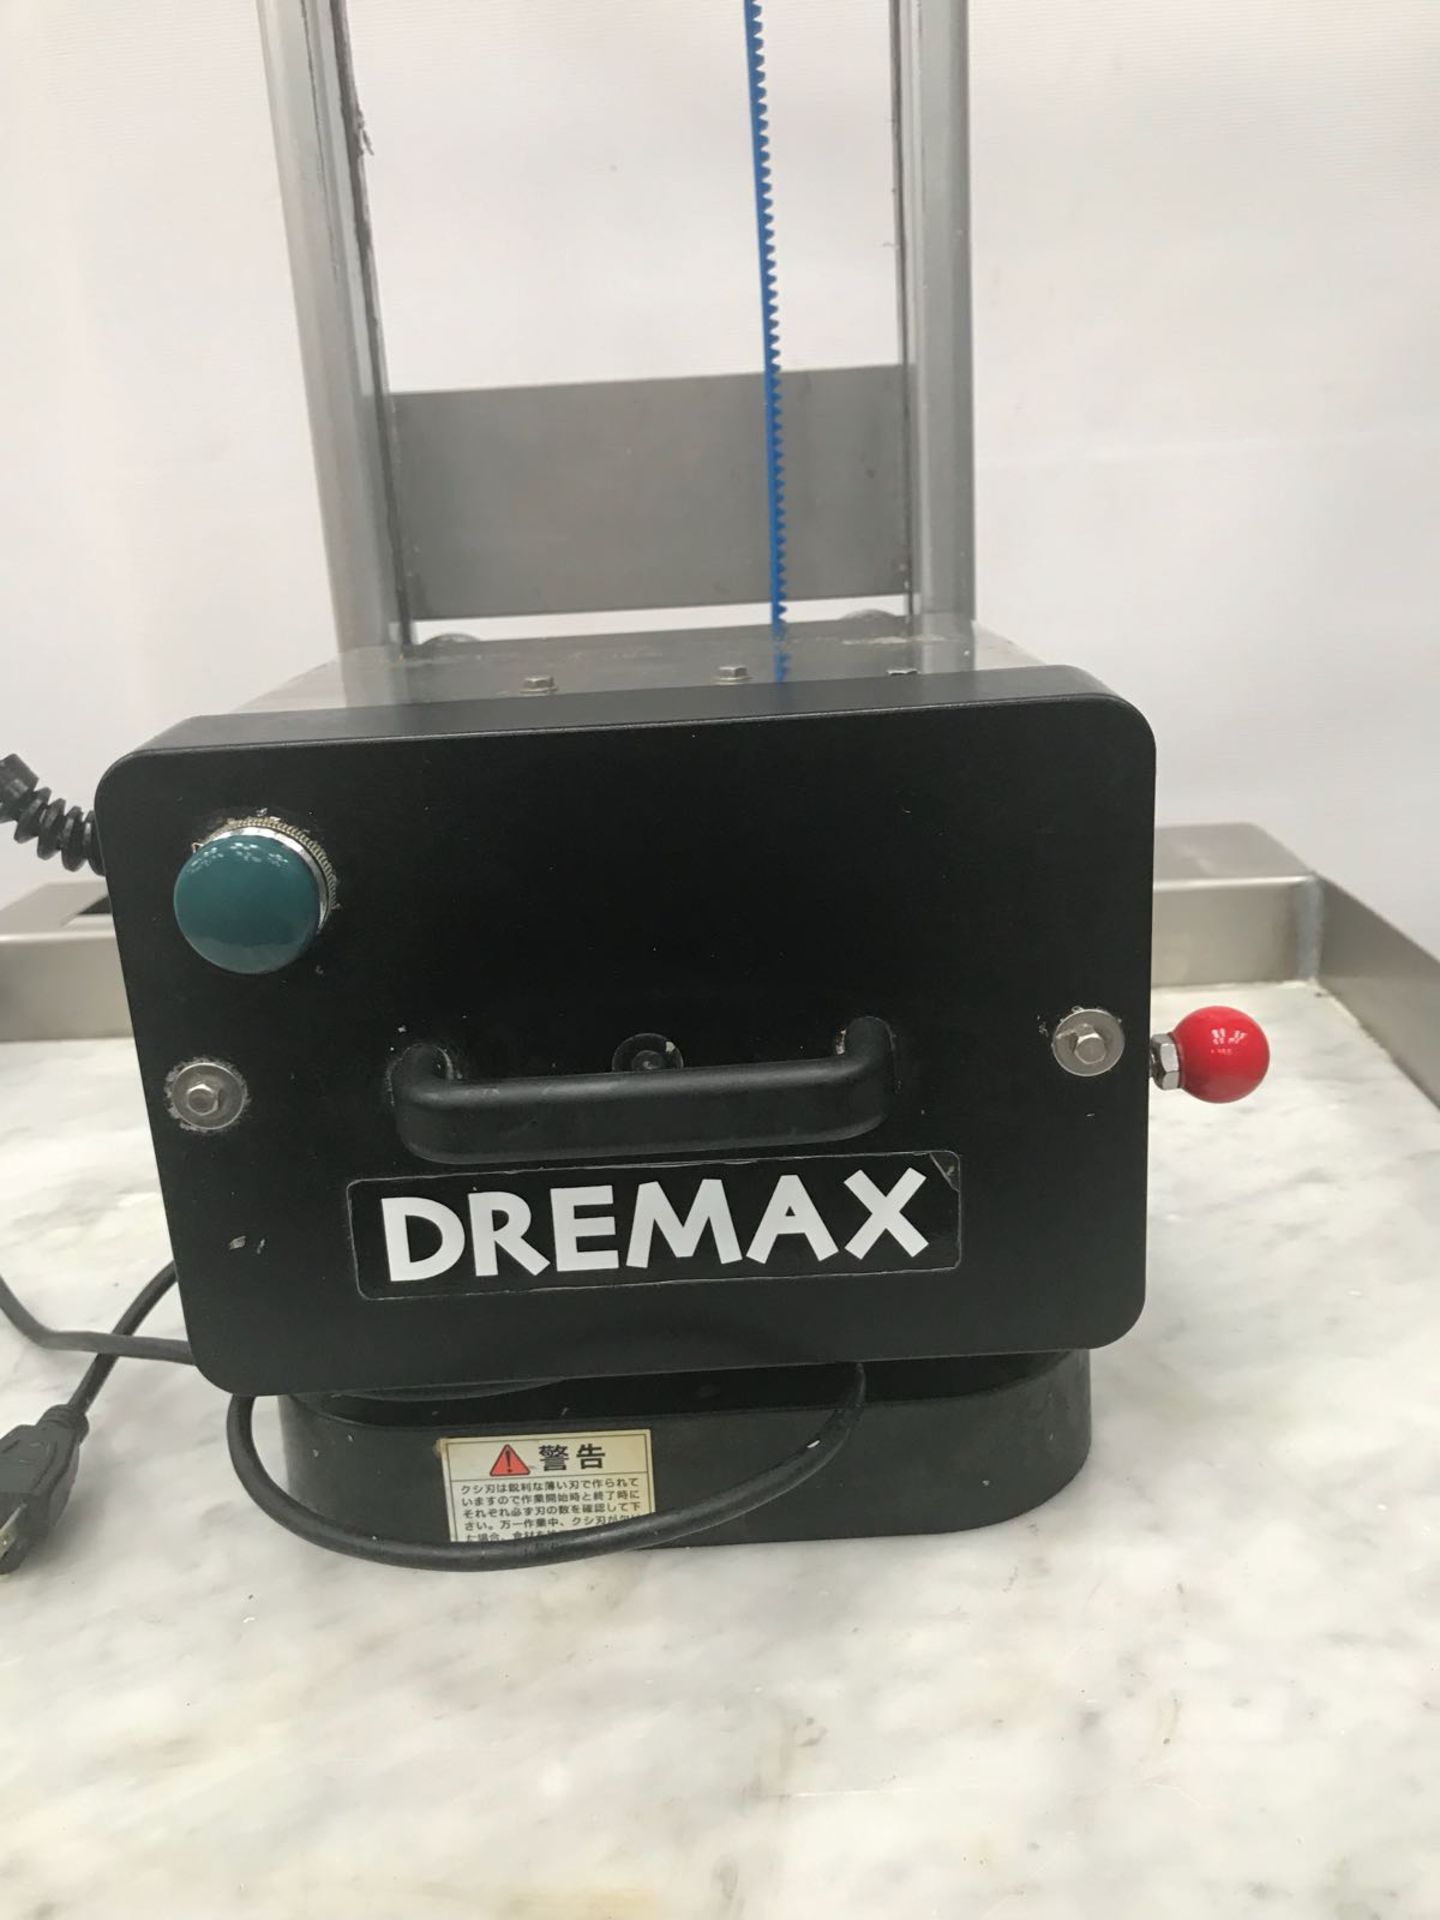 Dremax NK-100 High Speed Tumma cutter  Fully automated, high-performance cutter cutter with forced - Image 4 of 4